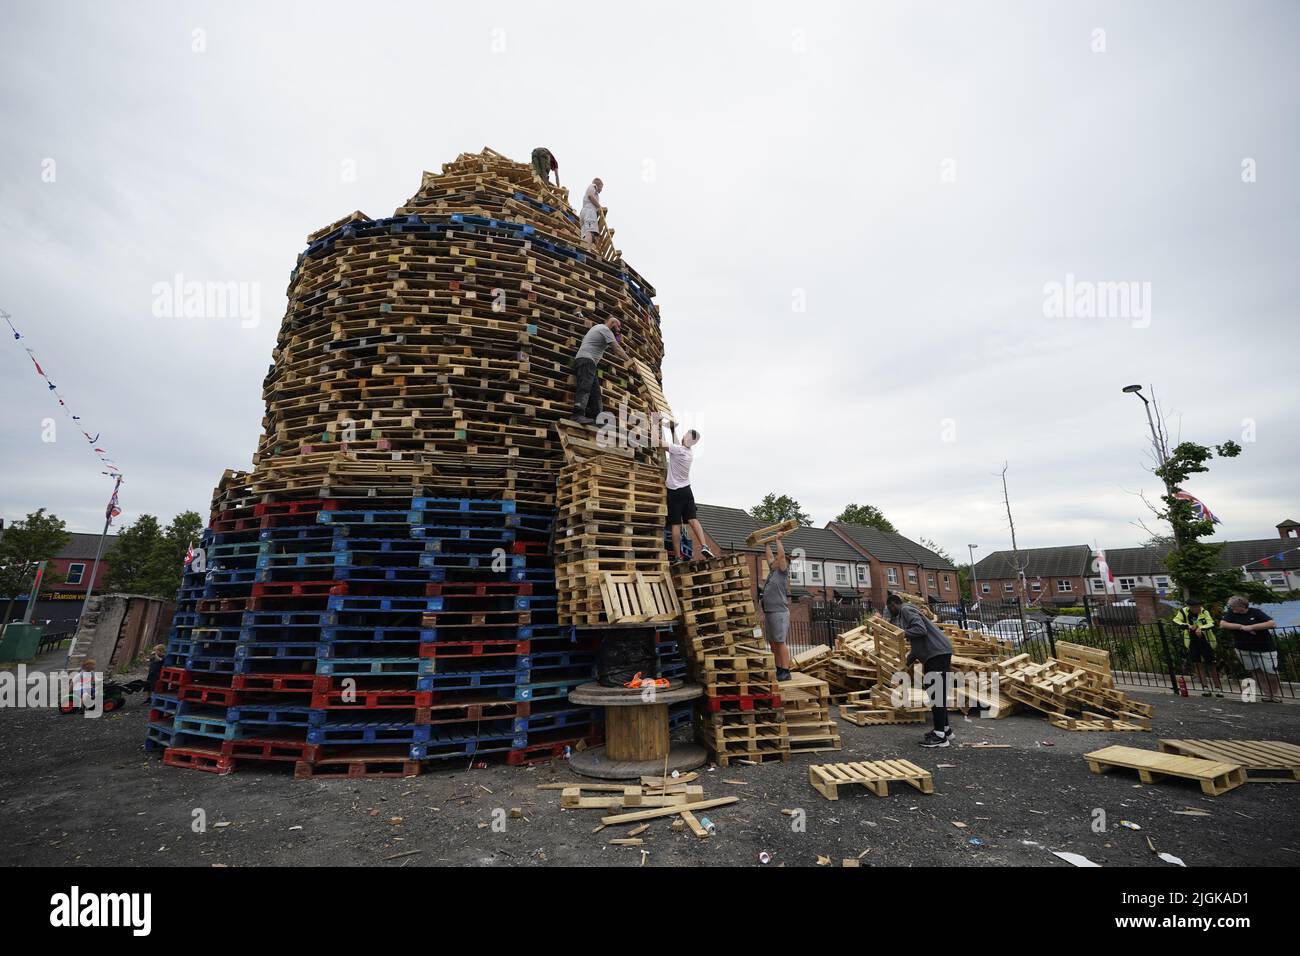 People add pallets to the bonfire at Pitt Park in east Belfast prior to it being lit on the 'Eleventh night' to usher in the Twelfth commemorations. Picture date: Monday July 11, 2022. Stock Photo